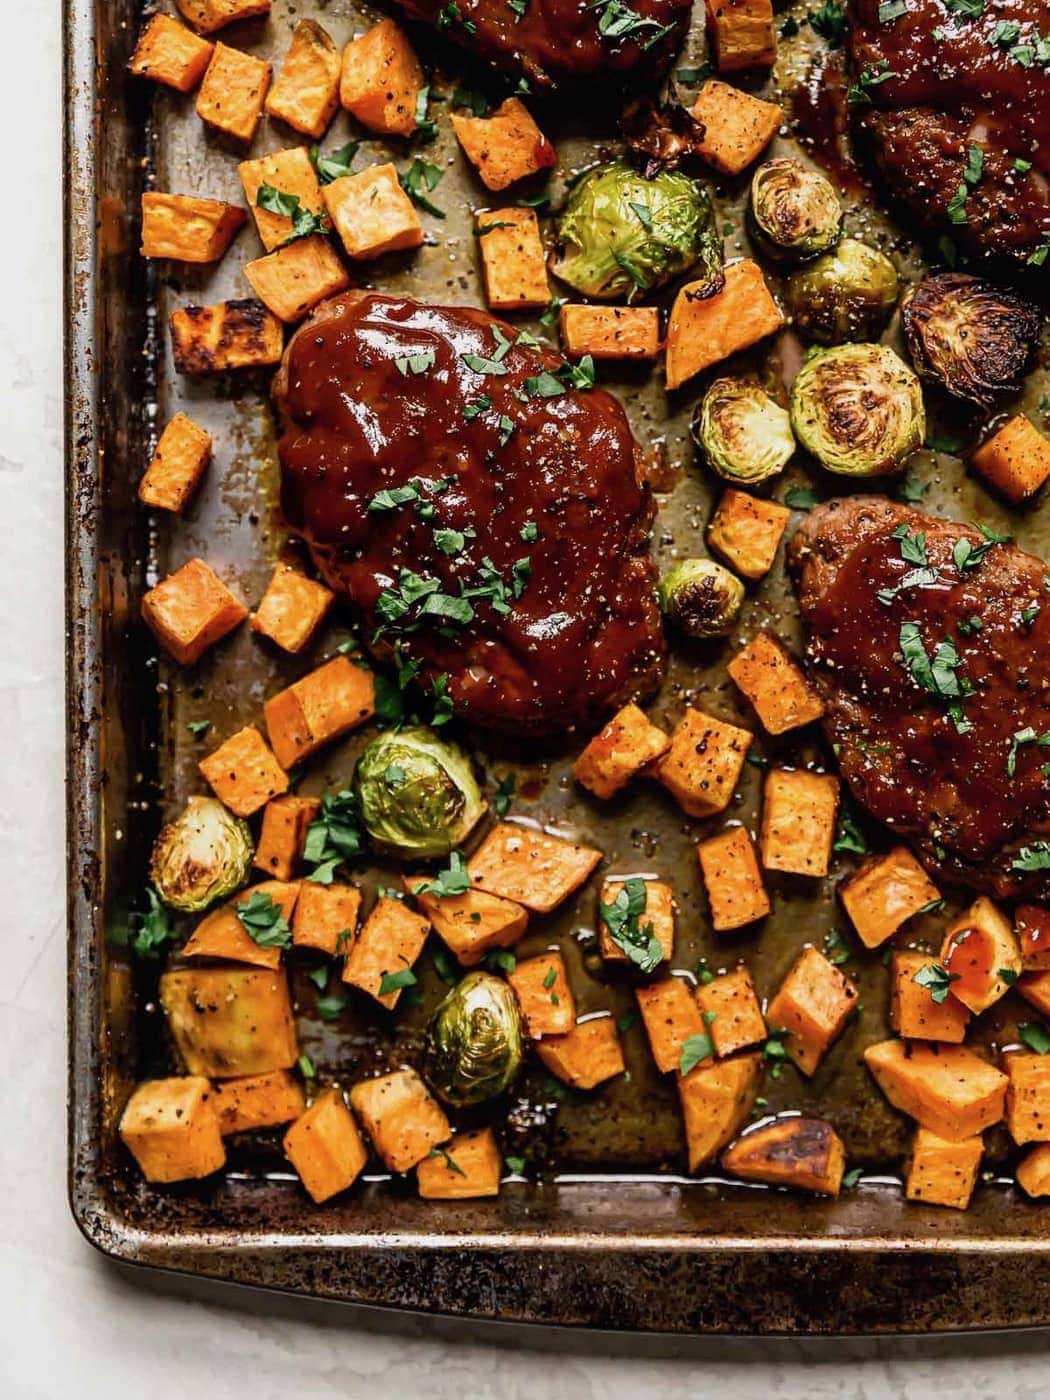 Sheet Pan Mini Meatloaf with Vegetables - The Real Food Dietitians